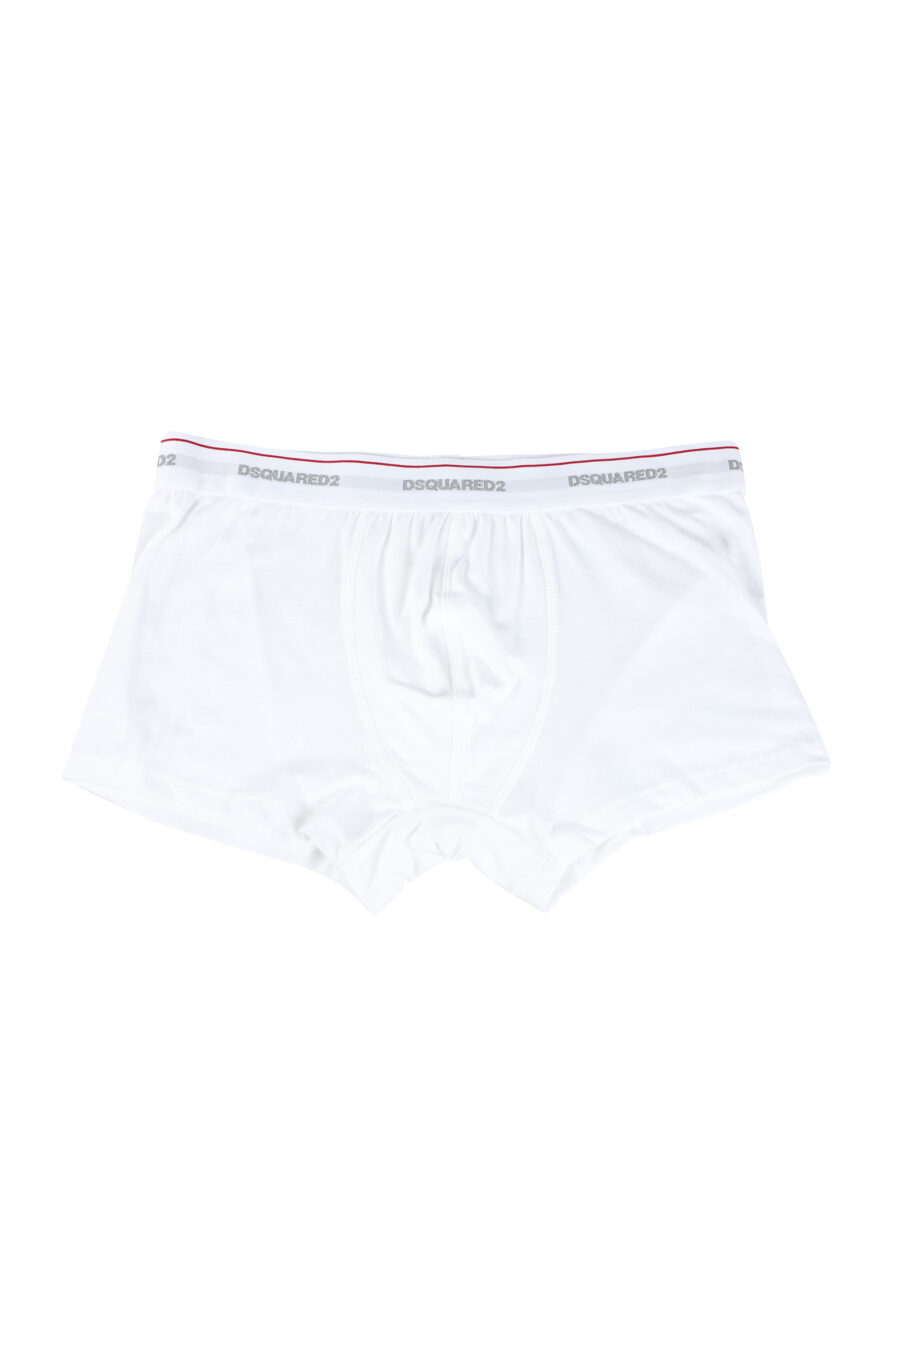 Pack of three white boxers with logo on waistband - IMG 9649